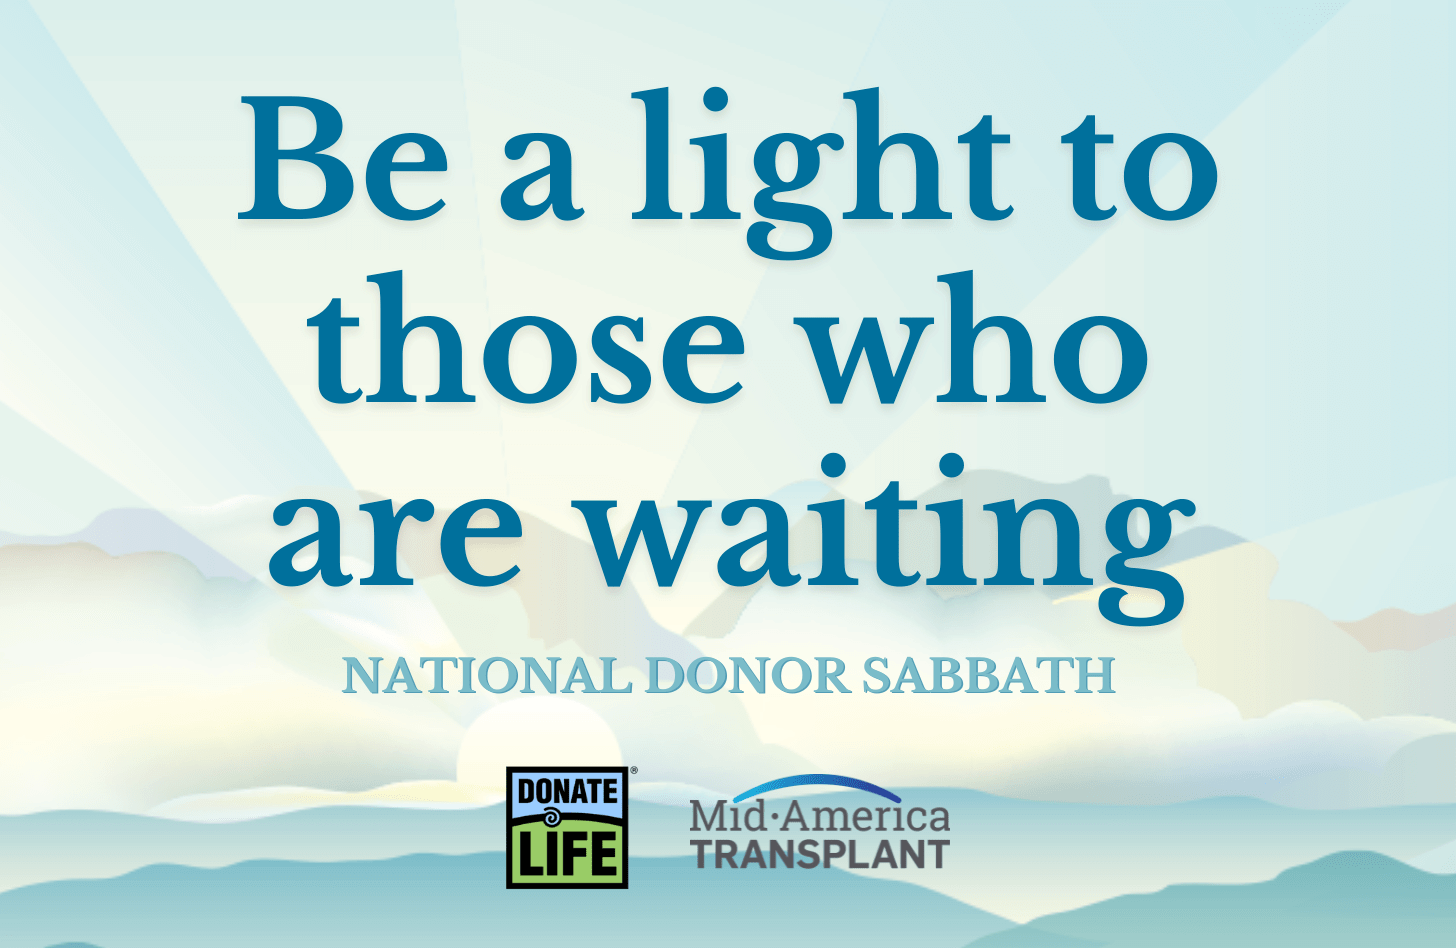 "Be a light to those who are waiting. - National Donor Sabbath"